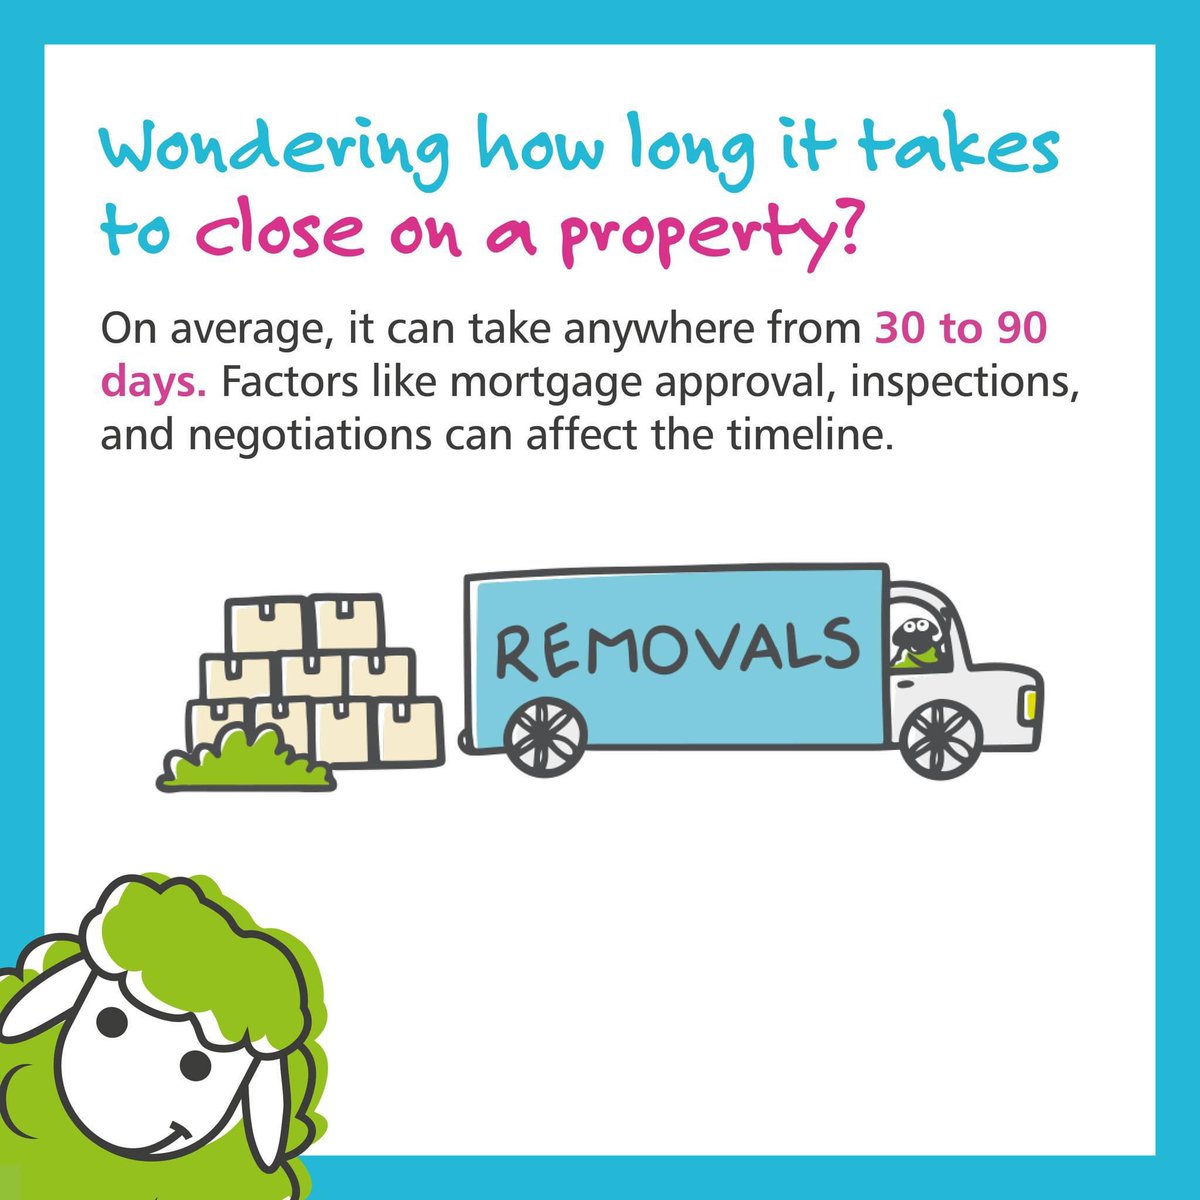 Factors like mortgage approval, inspections, and negotiations can affect the timeline. Let us at Ewemove Stratford & Forest Gate guide you through the process smoothly! 🏠@EwemovStratford 

#EweMove #Stratford #ForestGate #TrustedEstateAgent #LocalEstateAgent